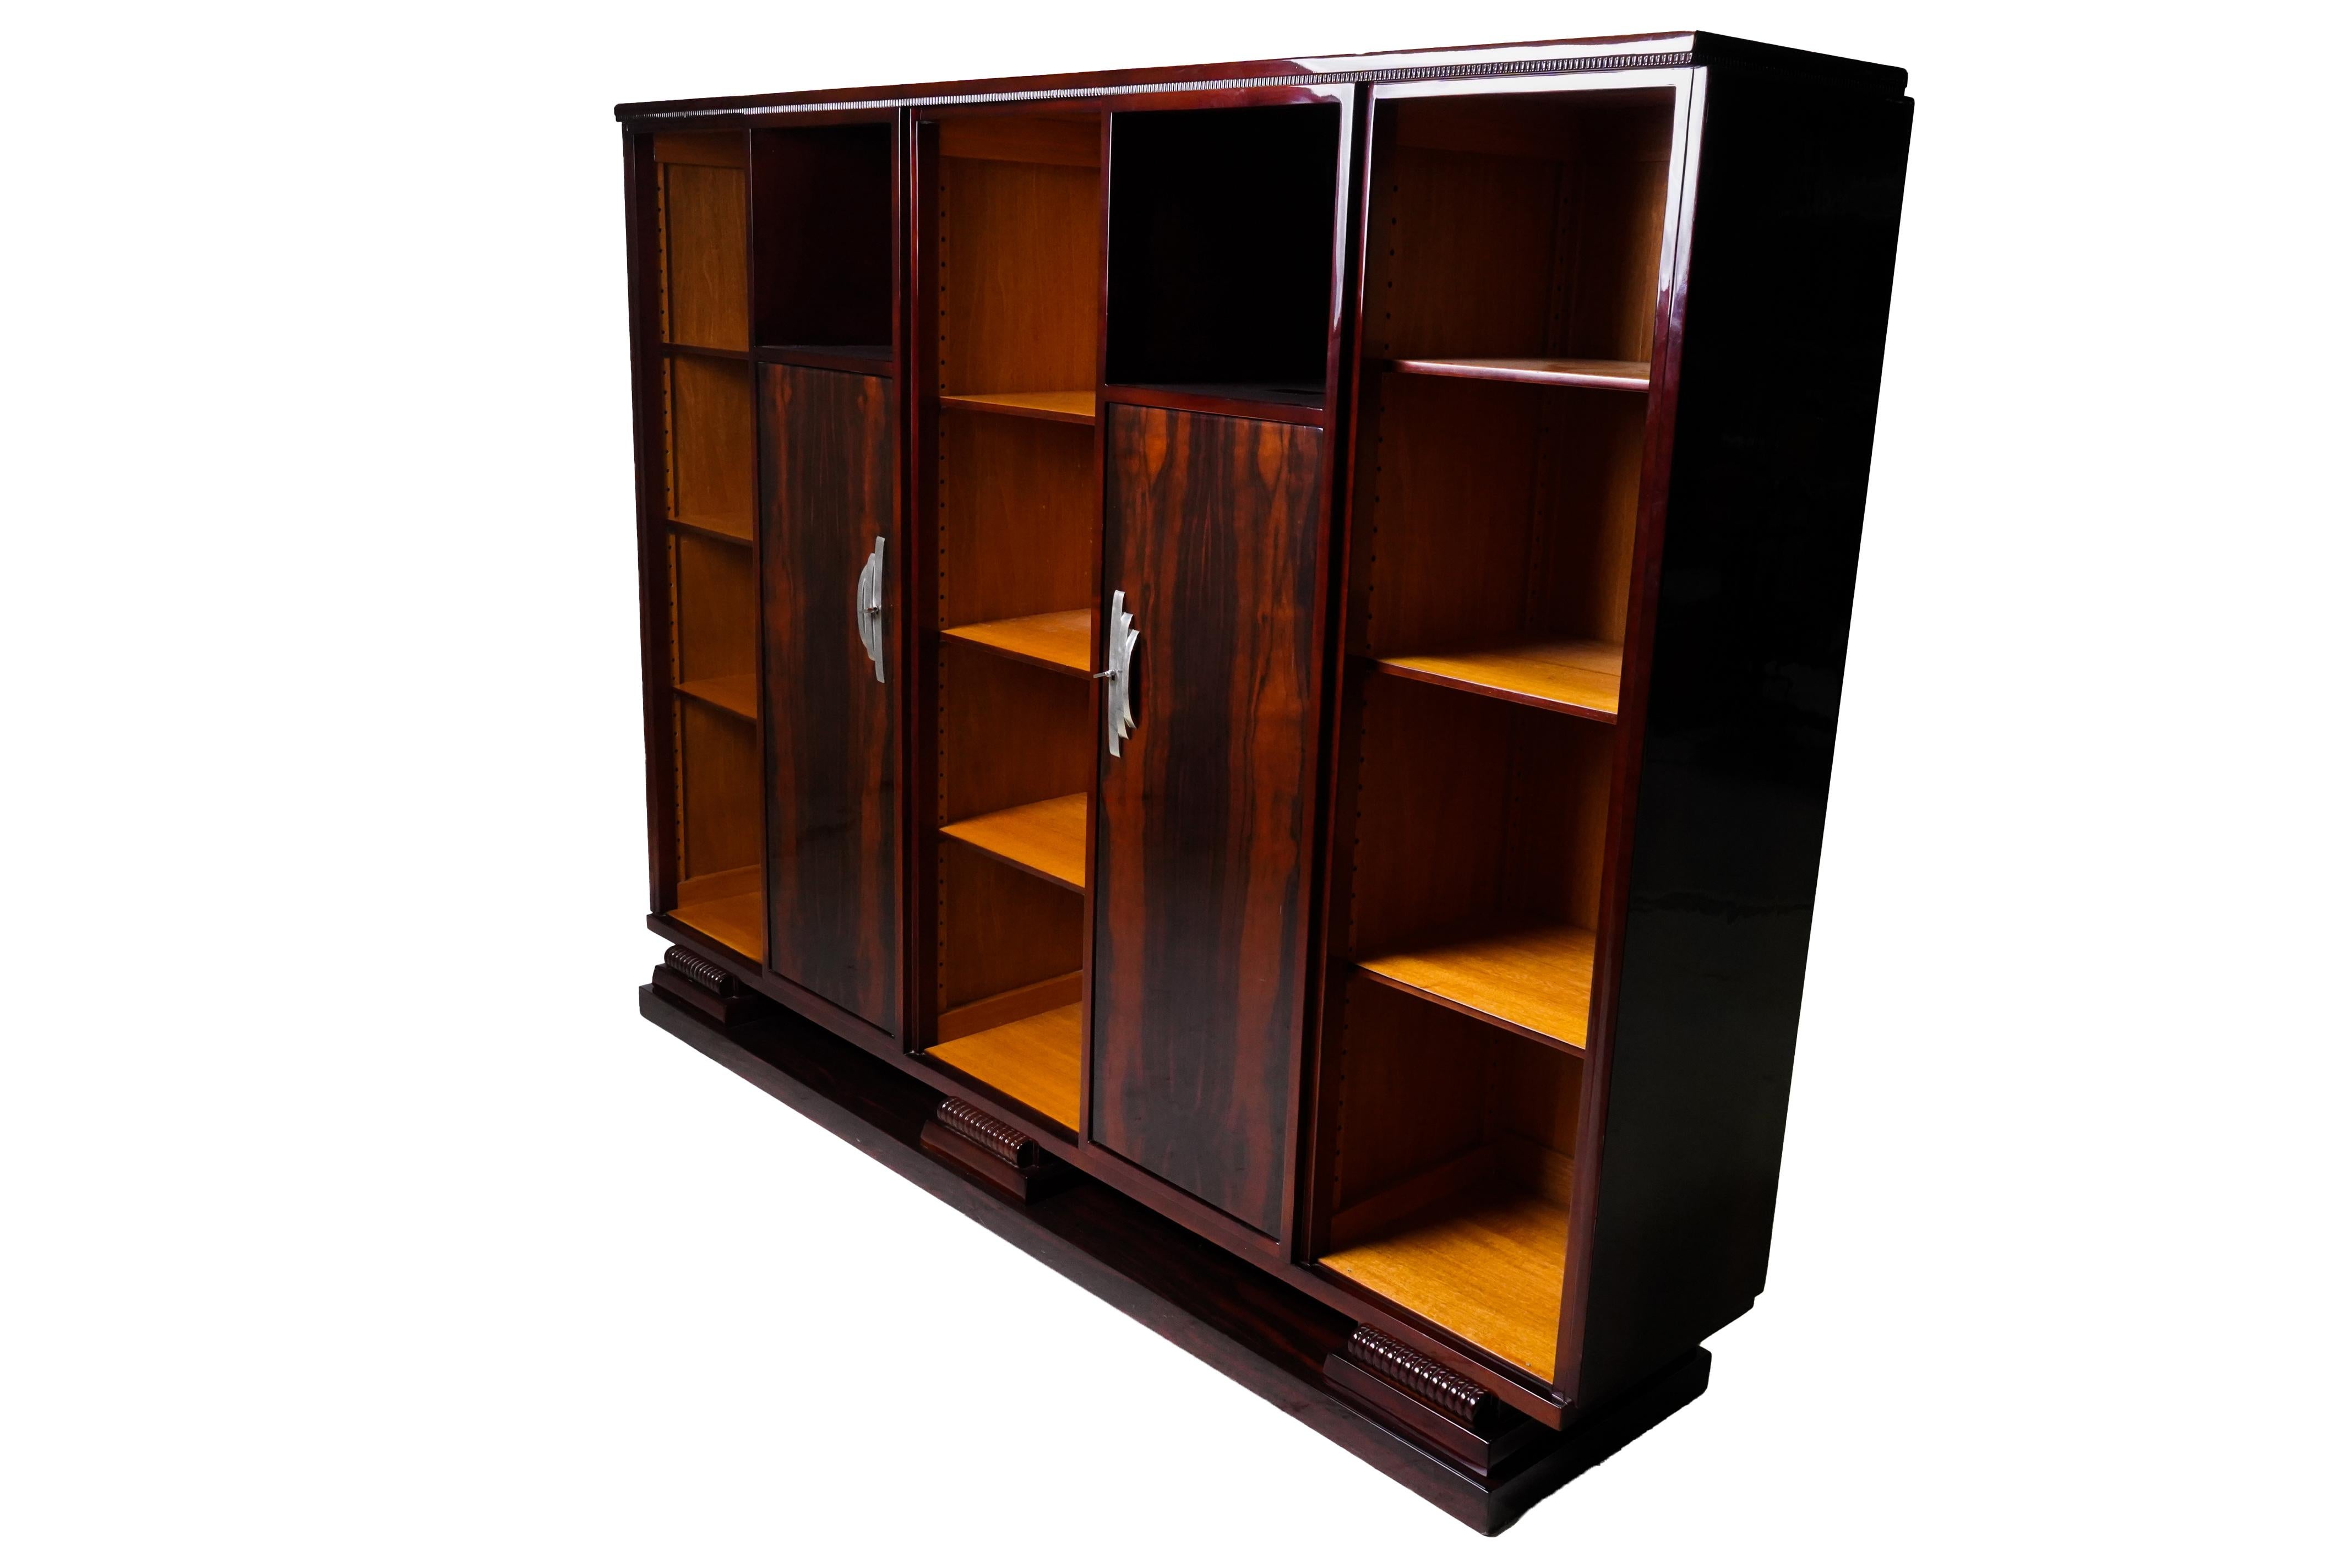 Vintage French Art Deco Display Cabinet From Rosewood Veneer In Good Condition For Sale In Chicago, IL